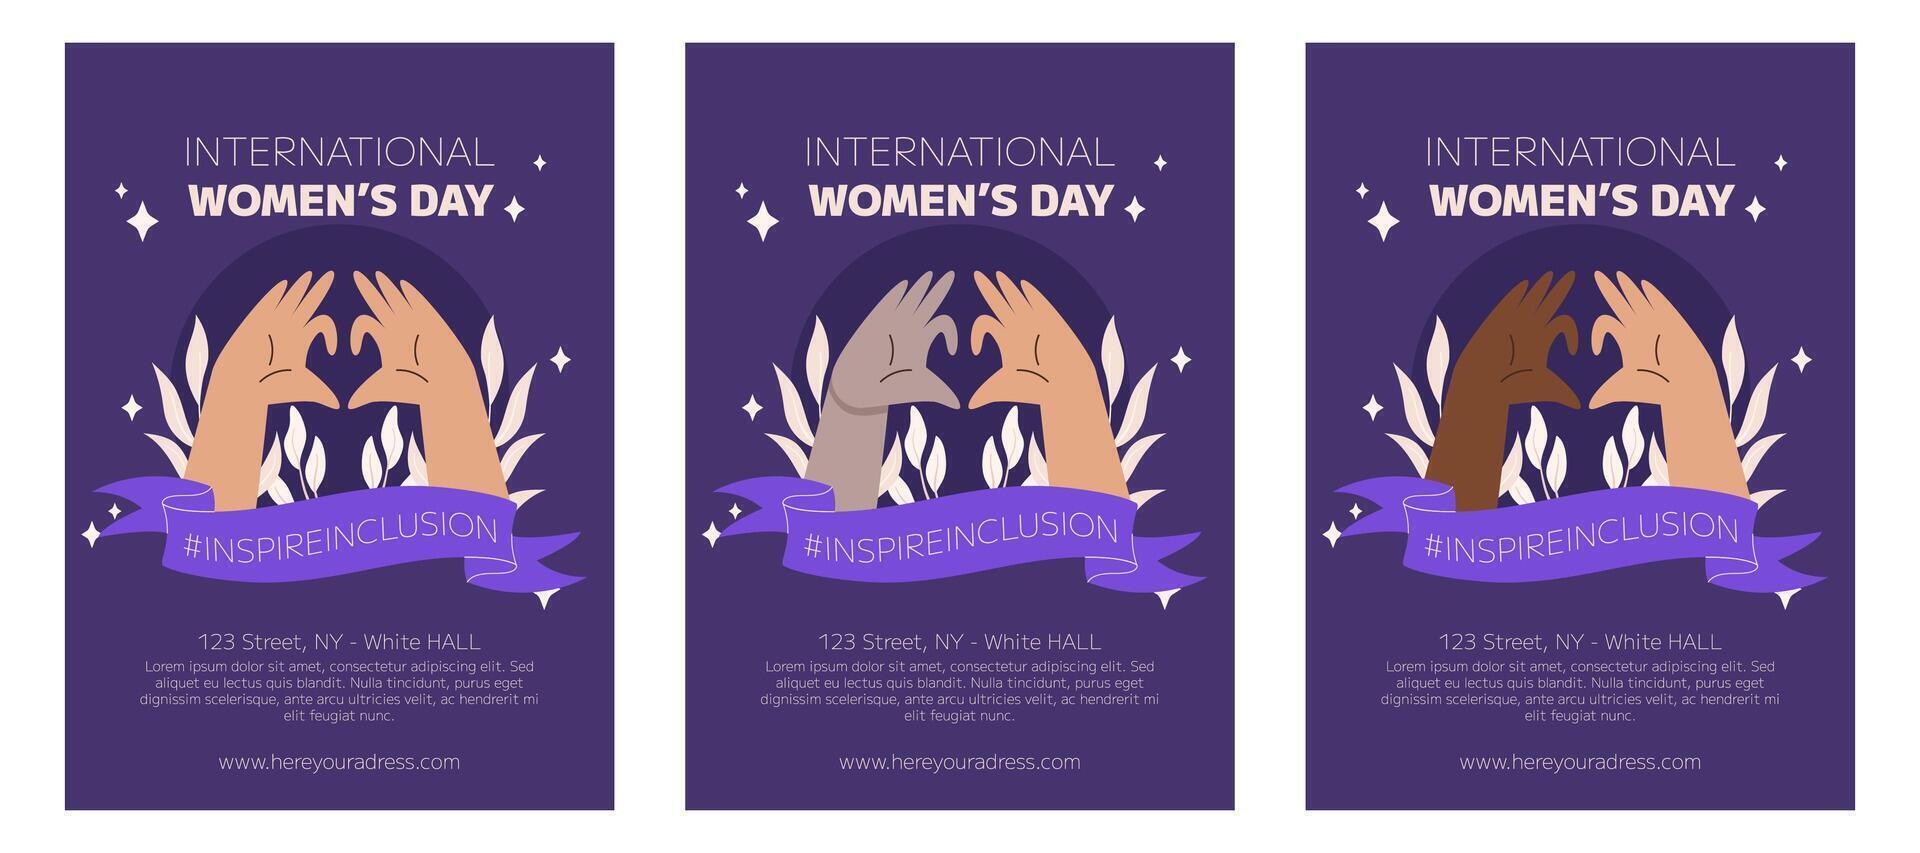 IWD Inspire Inclusion campaign, International Women's Day 2024 Poster collection features variety of hands showing the heart gesture. Vector hand drawn illustration in flat style.